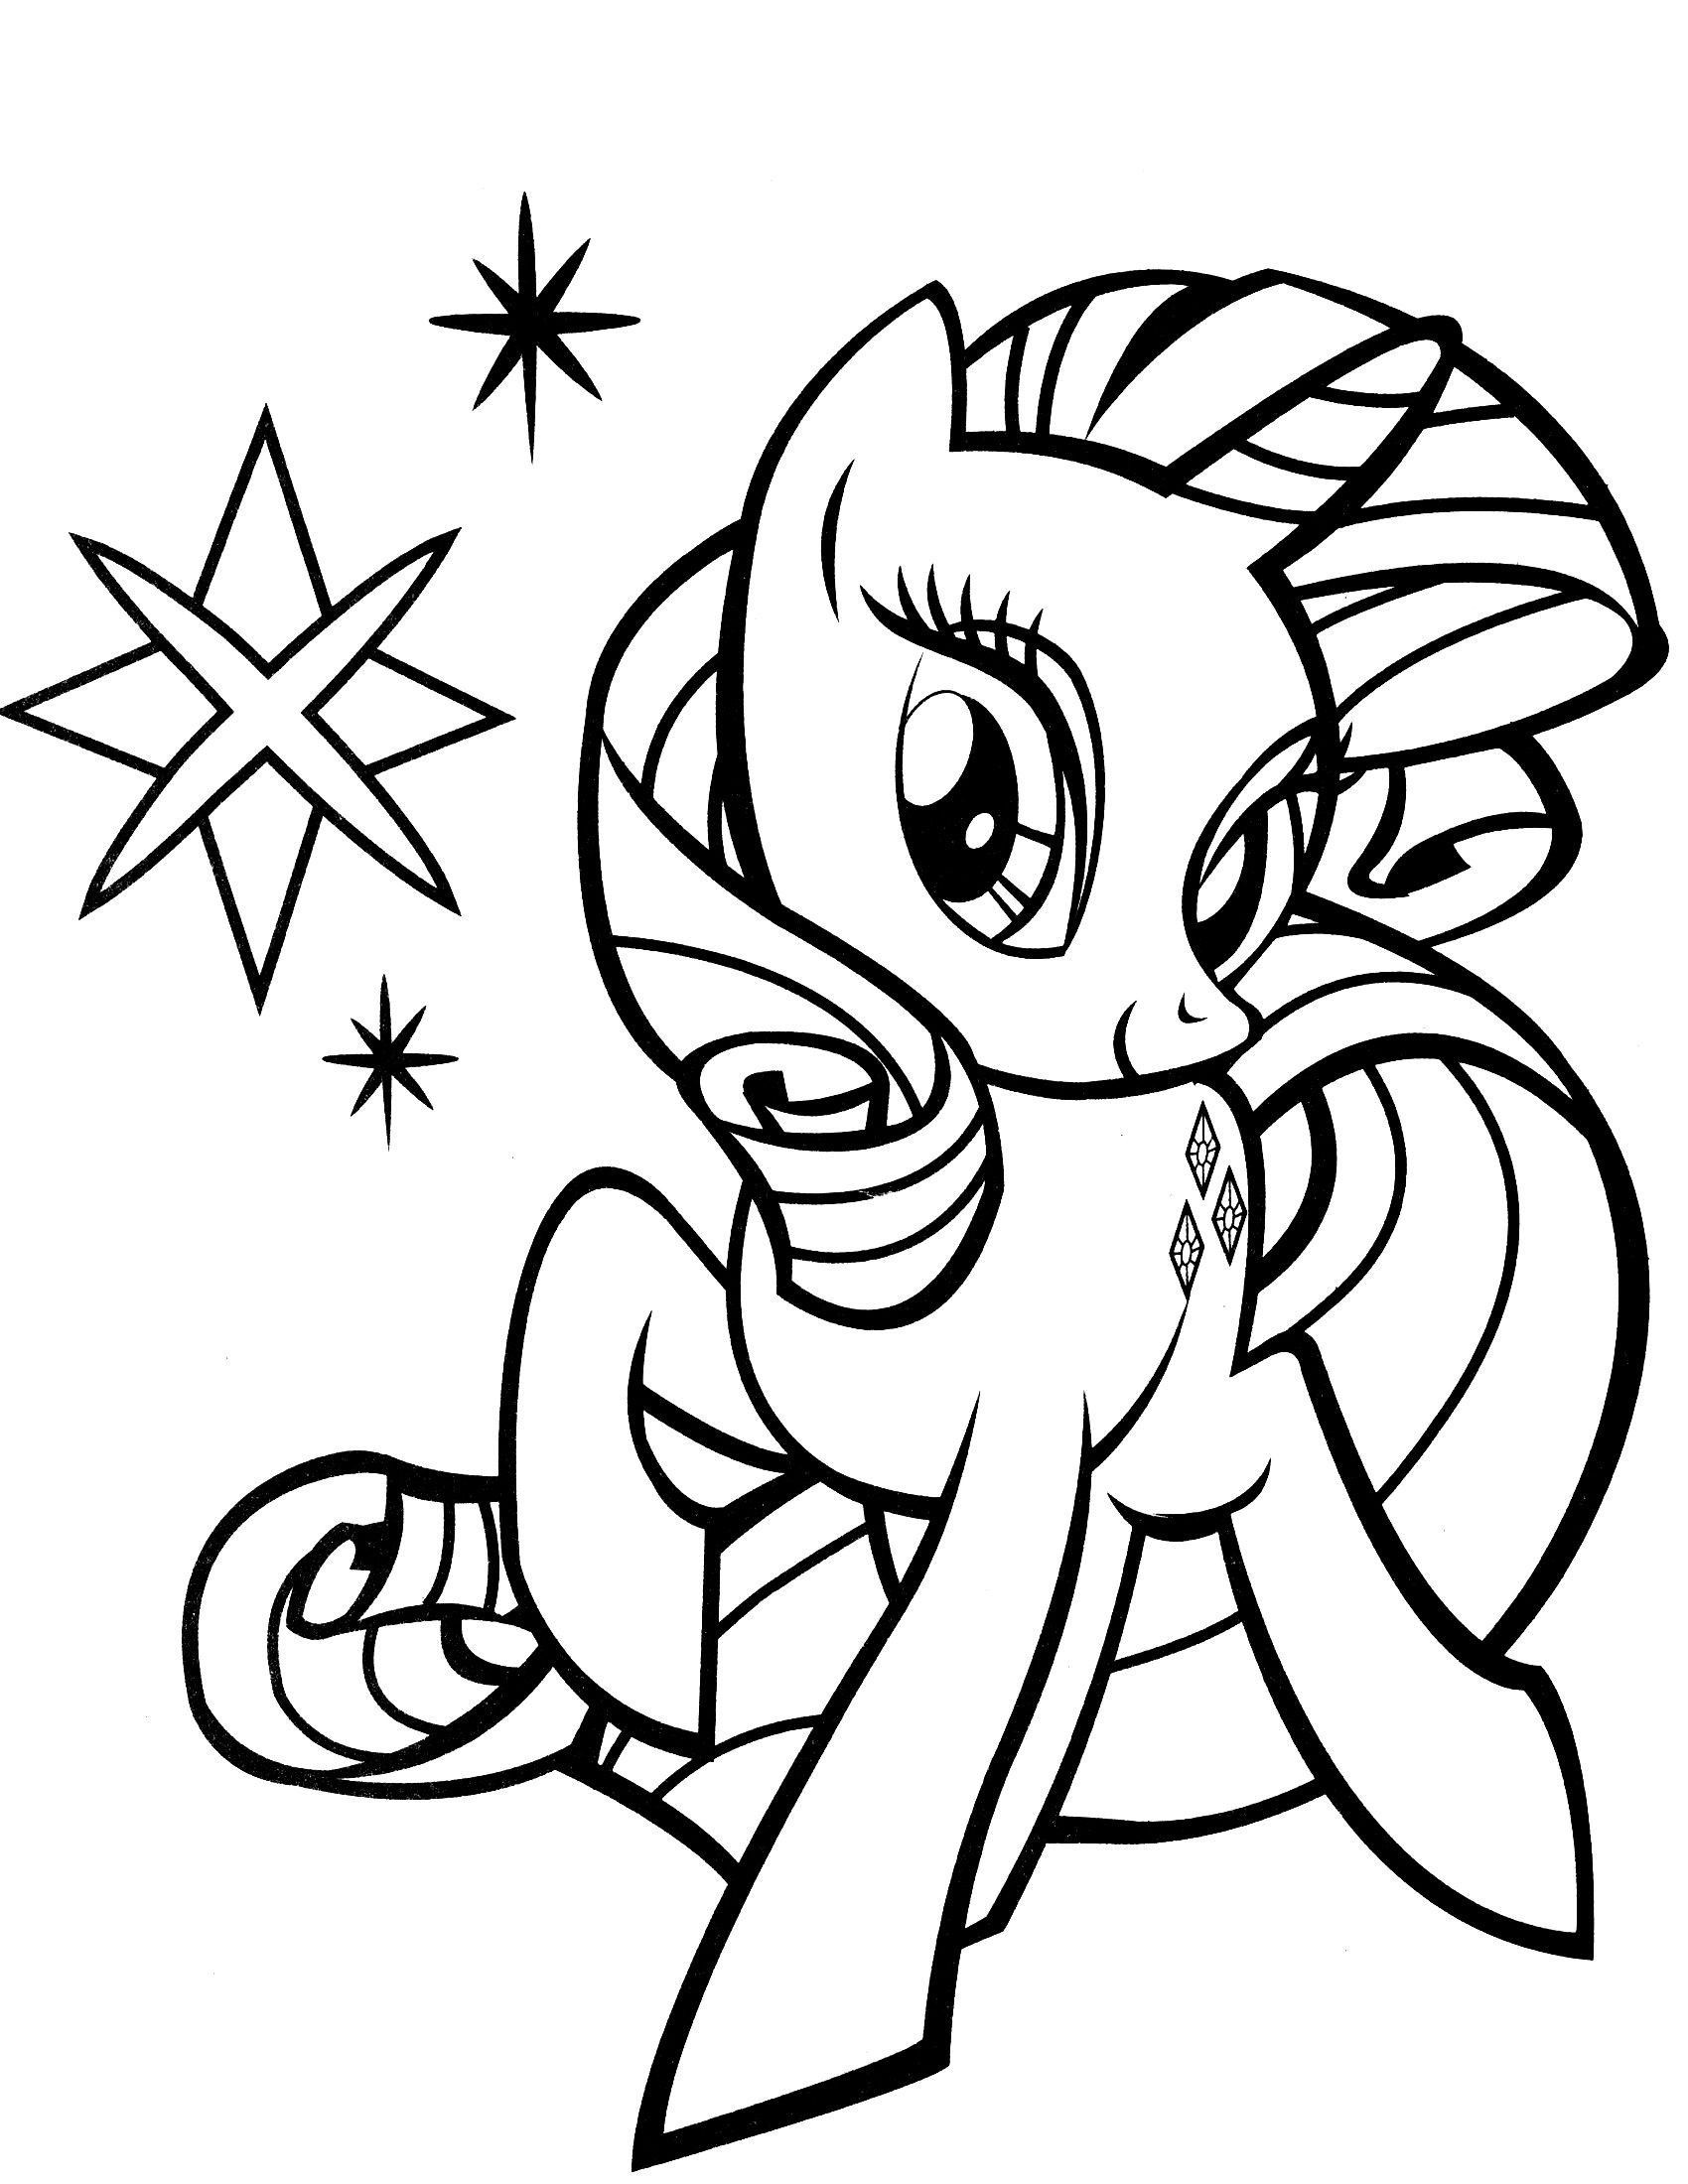 Coloring Pages For Girls Pdf
 My Little Pony Coloring Pages Pdf – Through the thousands